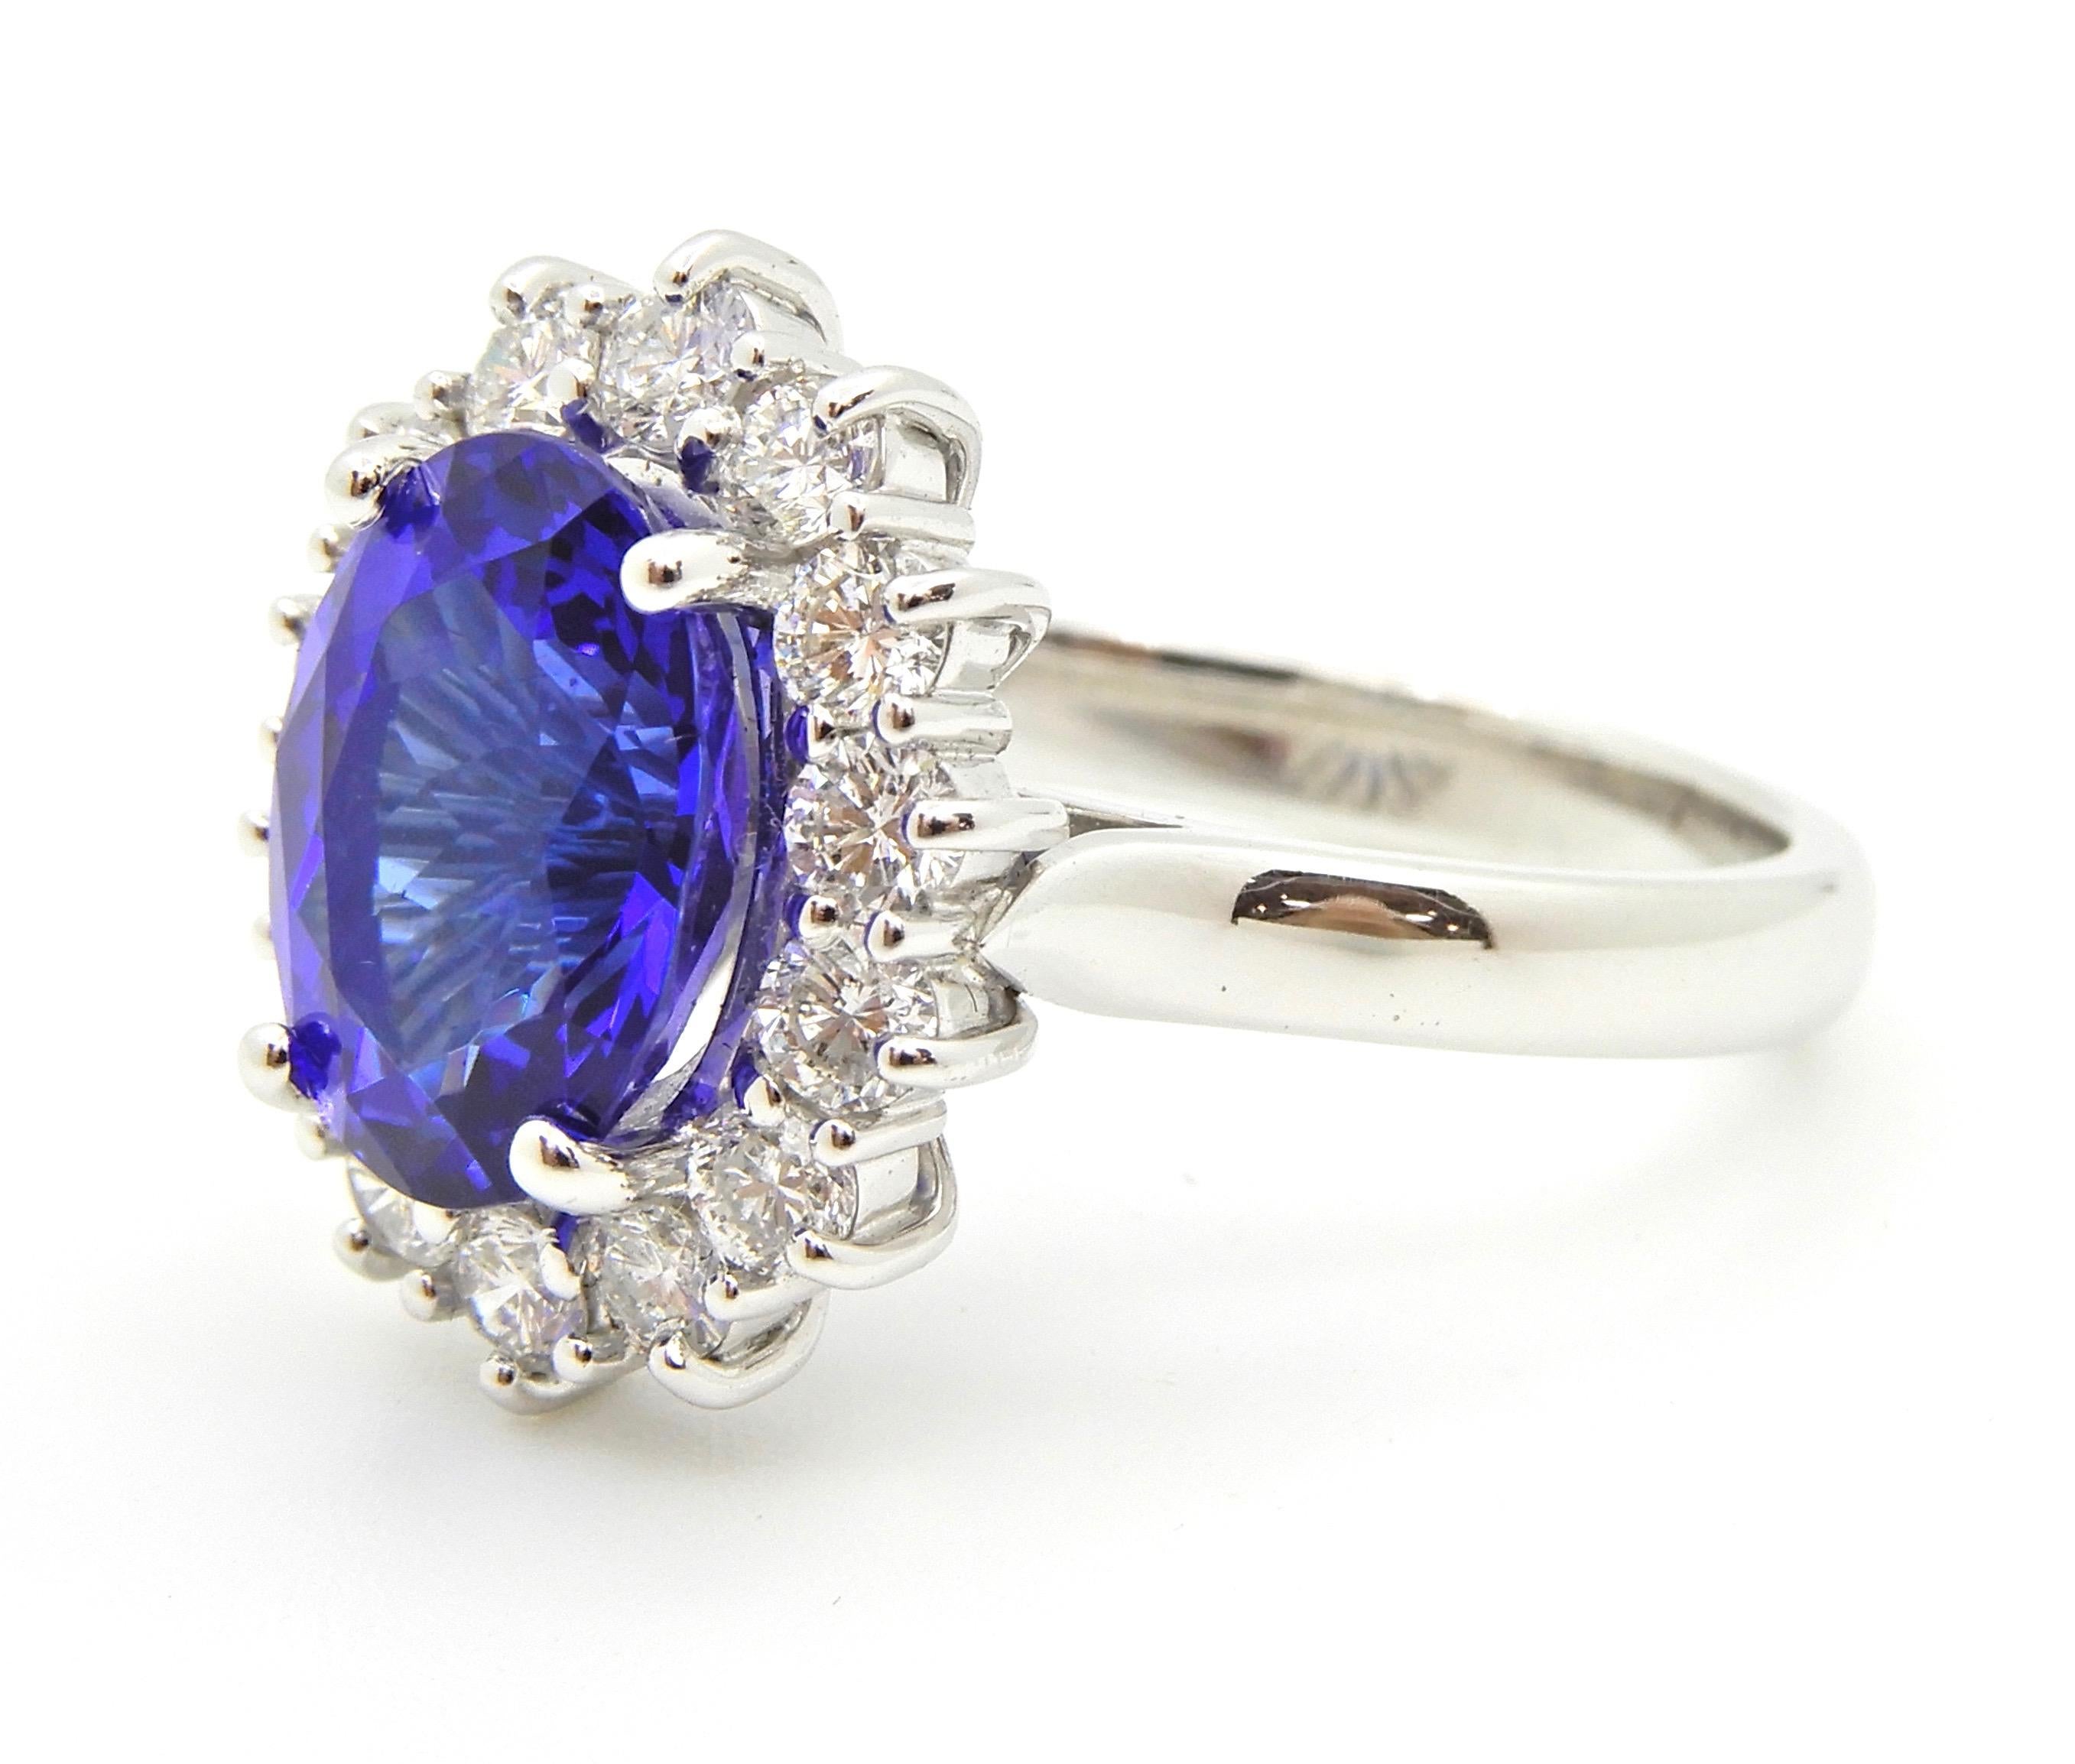 This 3.63 Carat Oval Cut Tanzanite and Diamond Handmade Ring is set in 18 carat white gold. The rounded, flat edge band which splits into an underrail and upswept shoulders supports a 14 wire basket holding the central 4 claw set oval Tanzanite